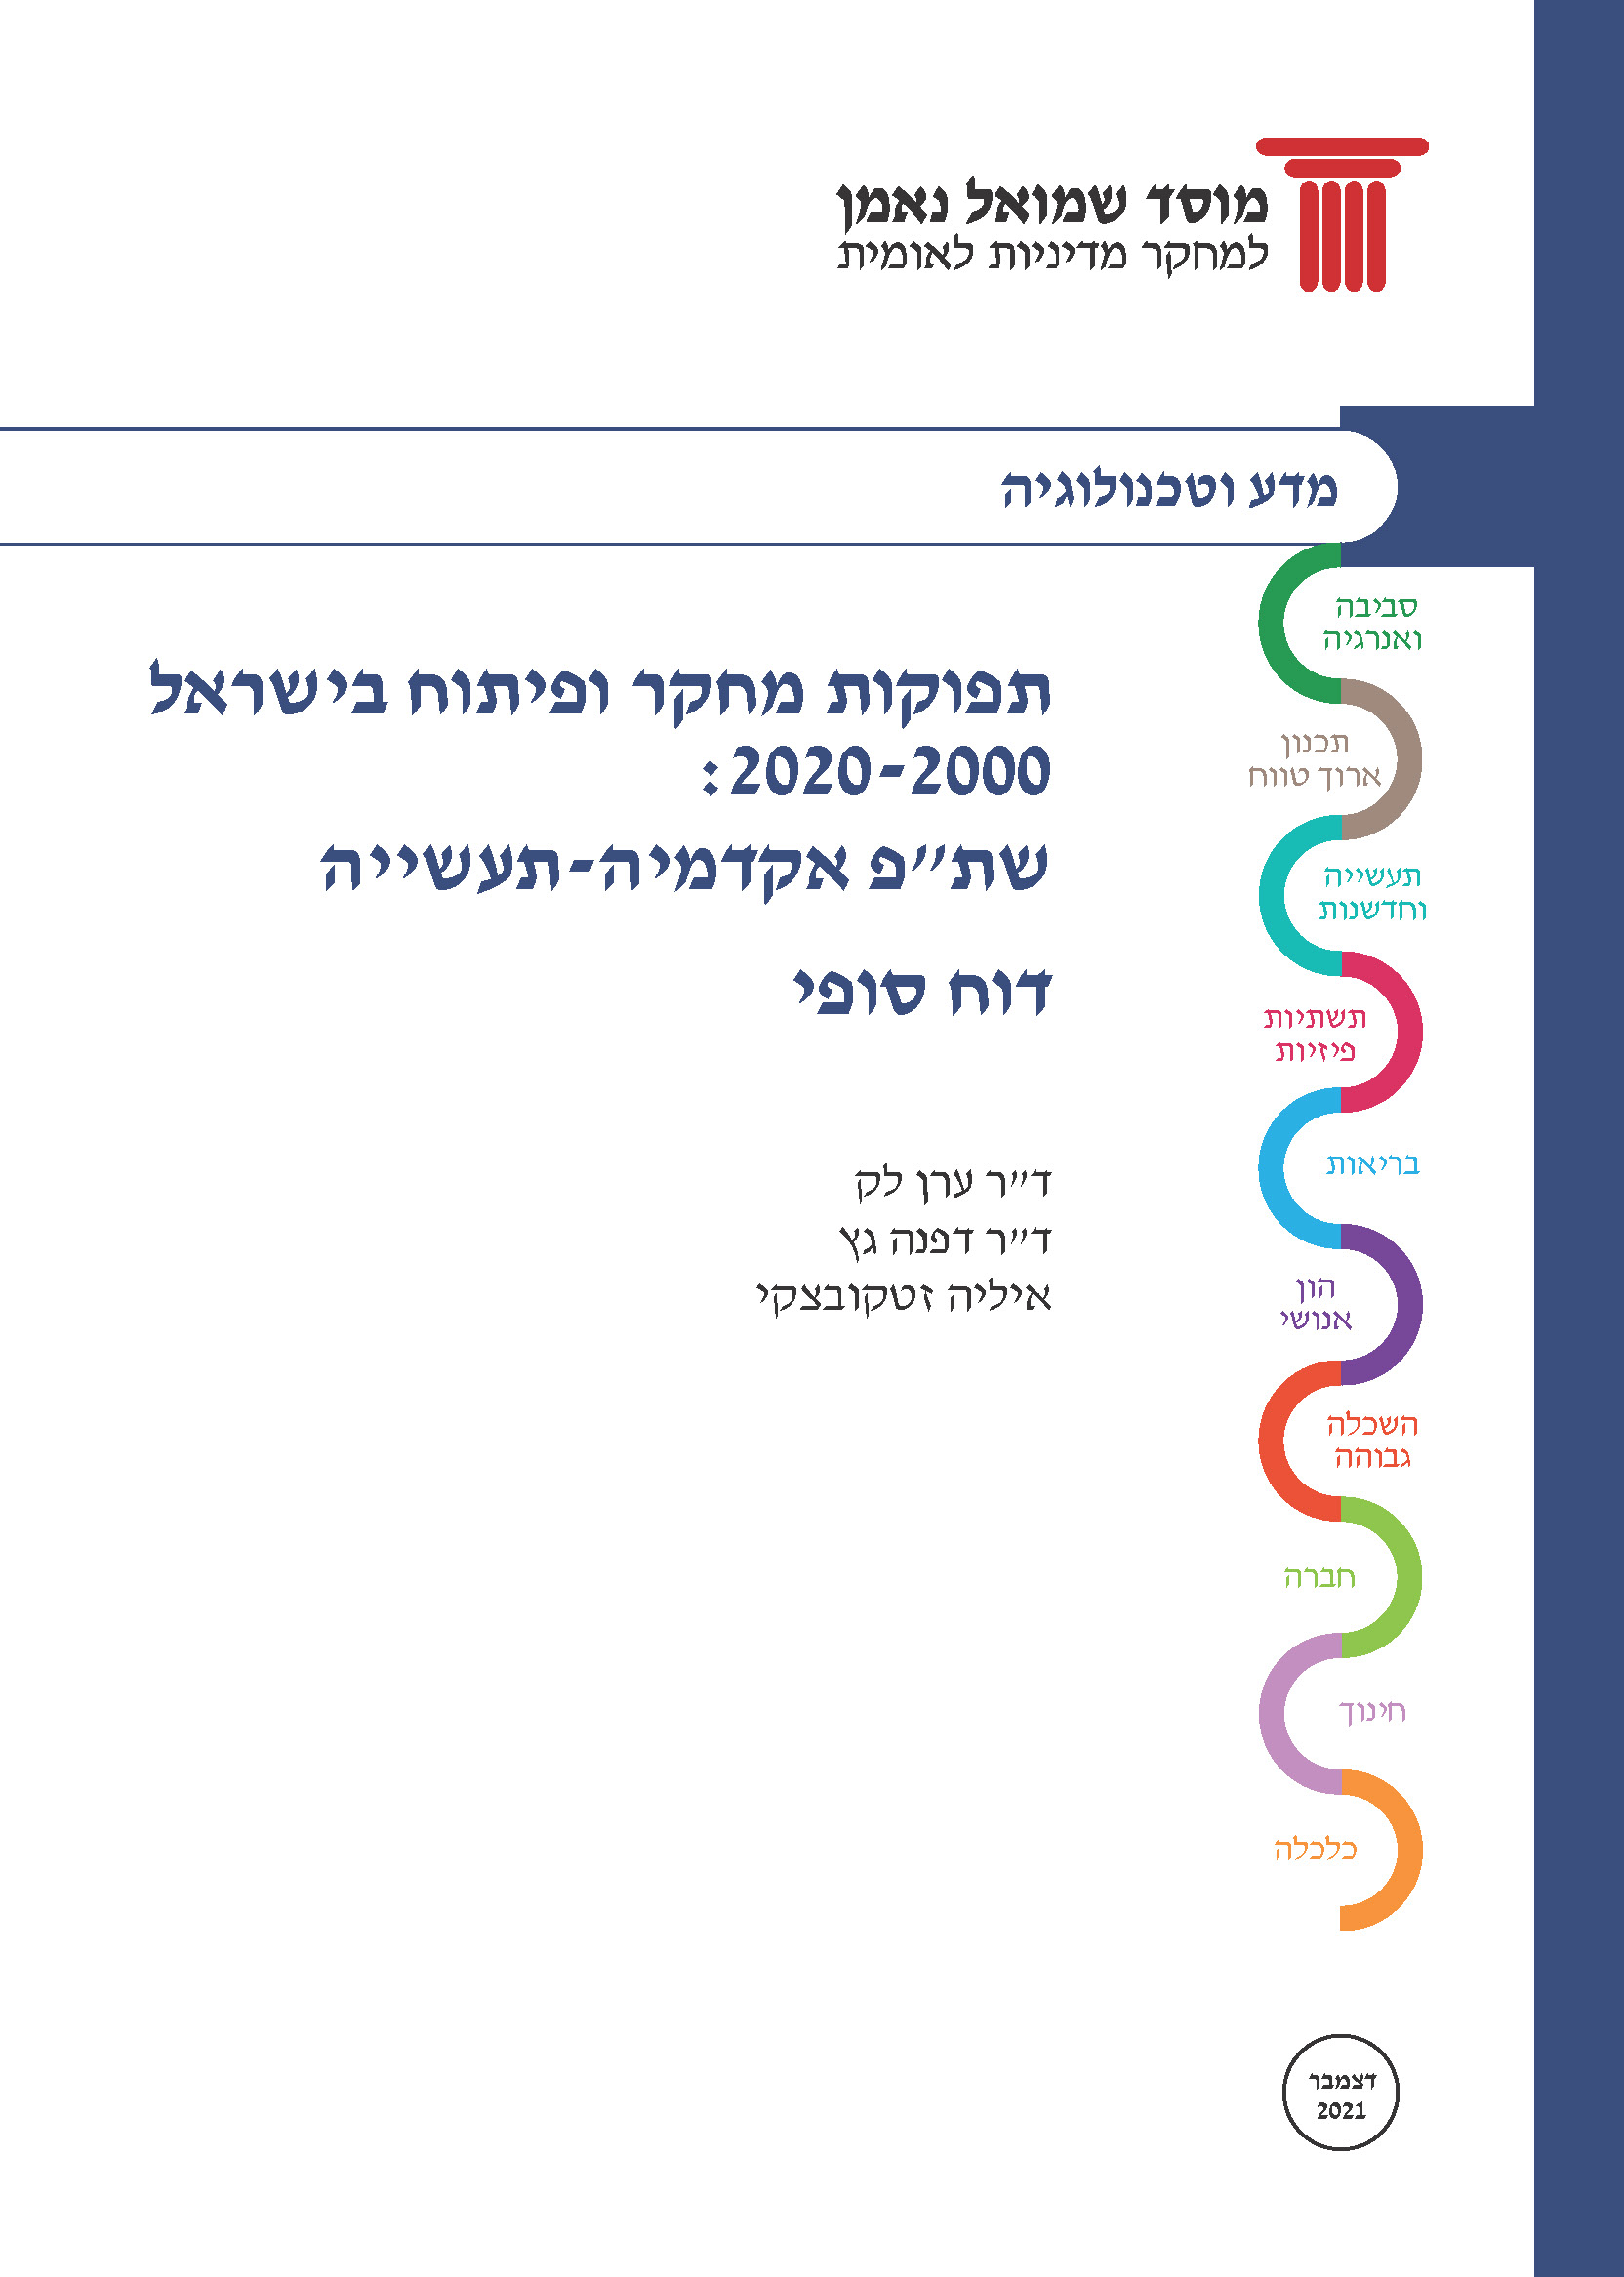 R&D outputs in Israel: Analysis of academia-industry collaboration in inventive activity